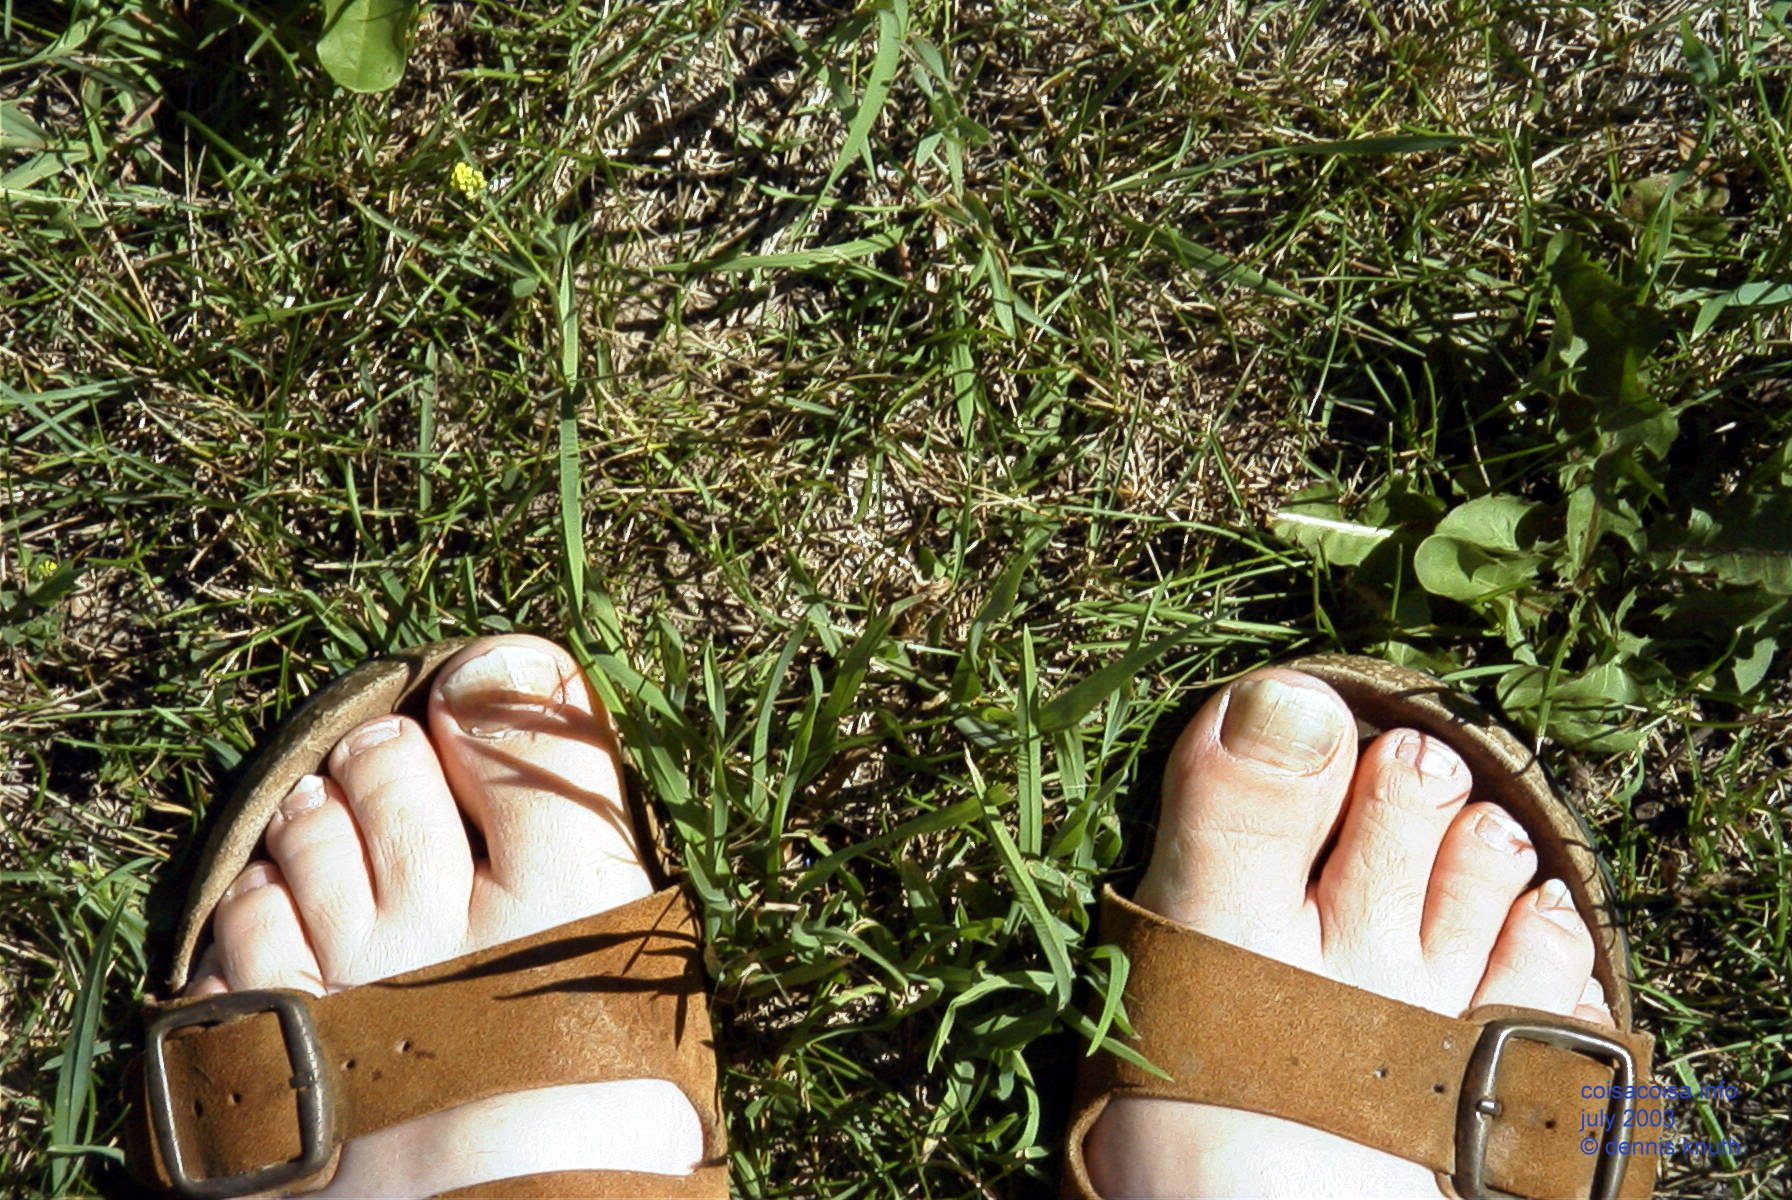 Sexy man feet and toes in the lawn wearing sandals CoisaCoisa